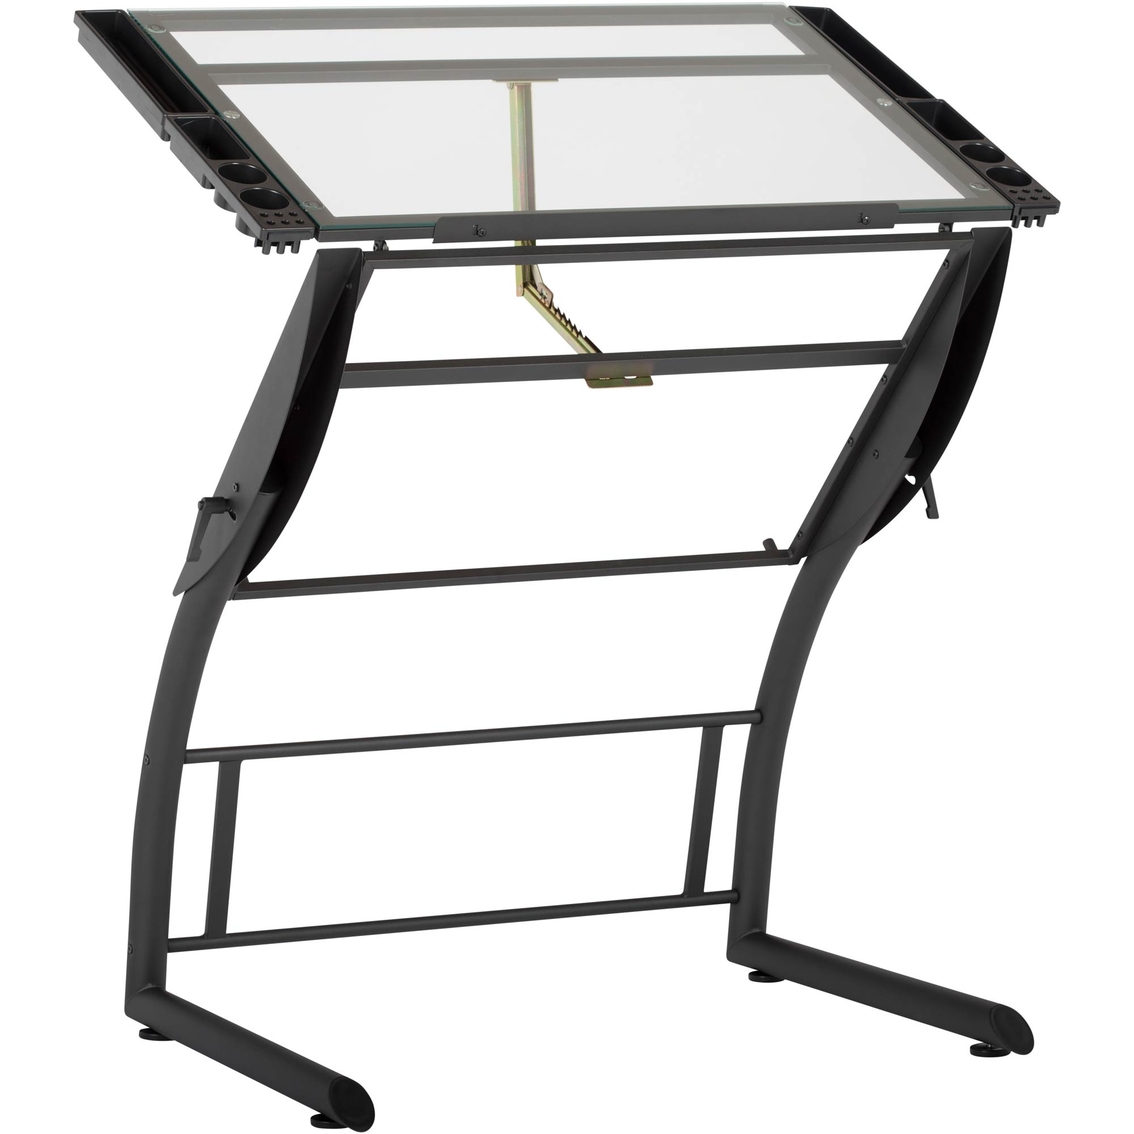 Studio Designs Triflex Drawing Table - Image 2 of 4